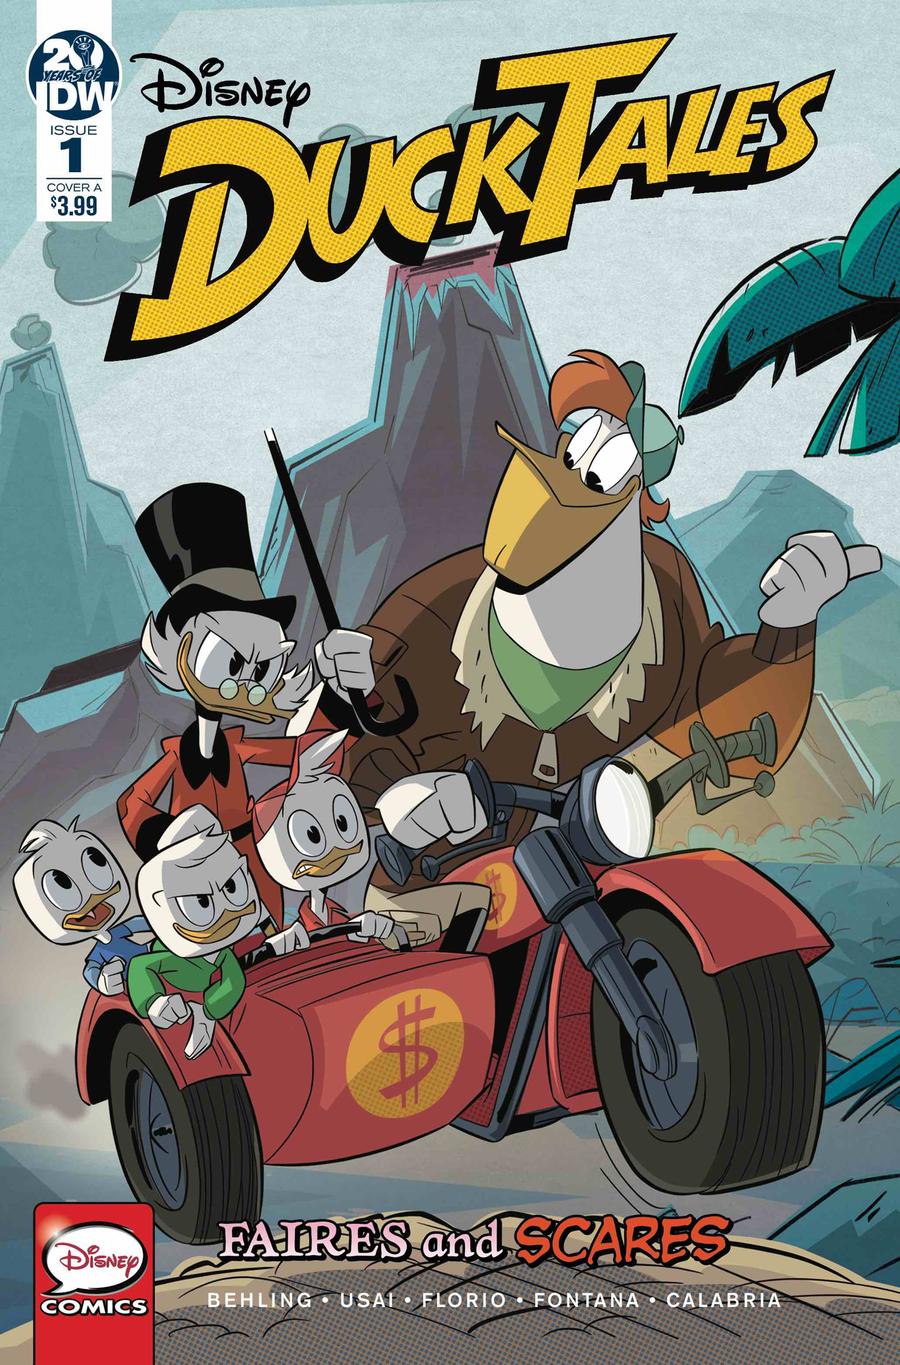 Ducktales Faires And Scares #1 Cover A Regular Marco Ghiglione & Cristina Stella Cover